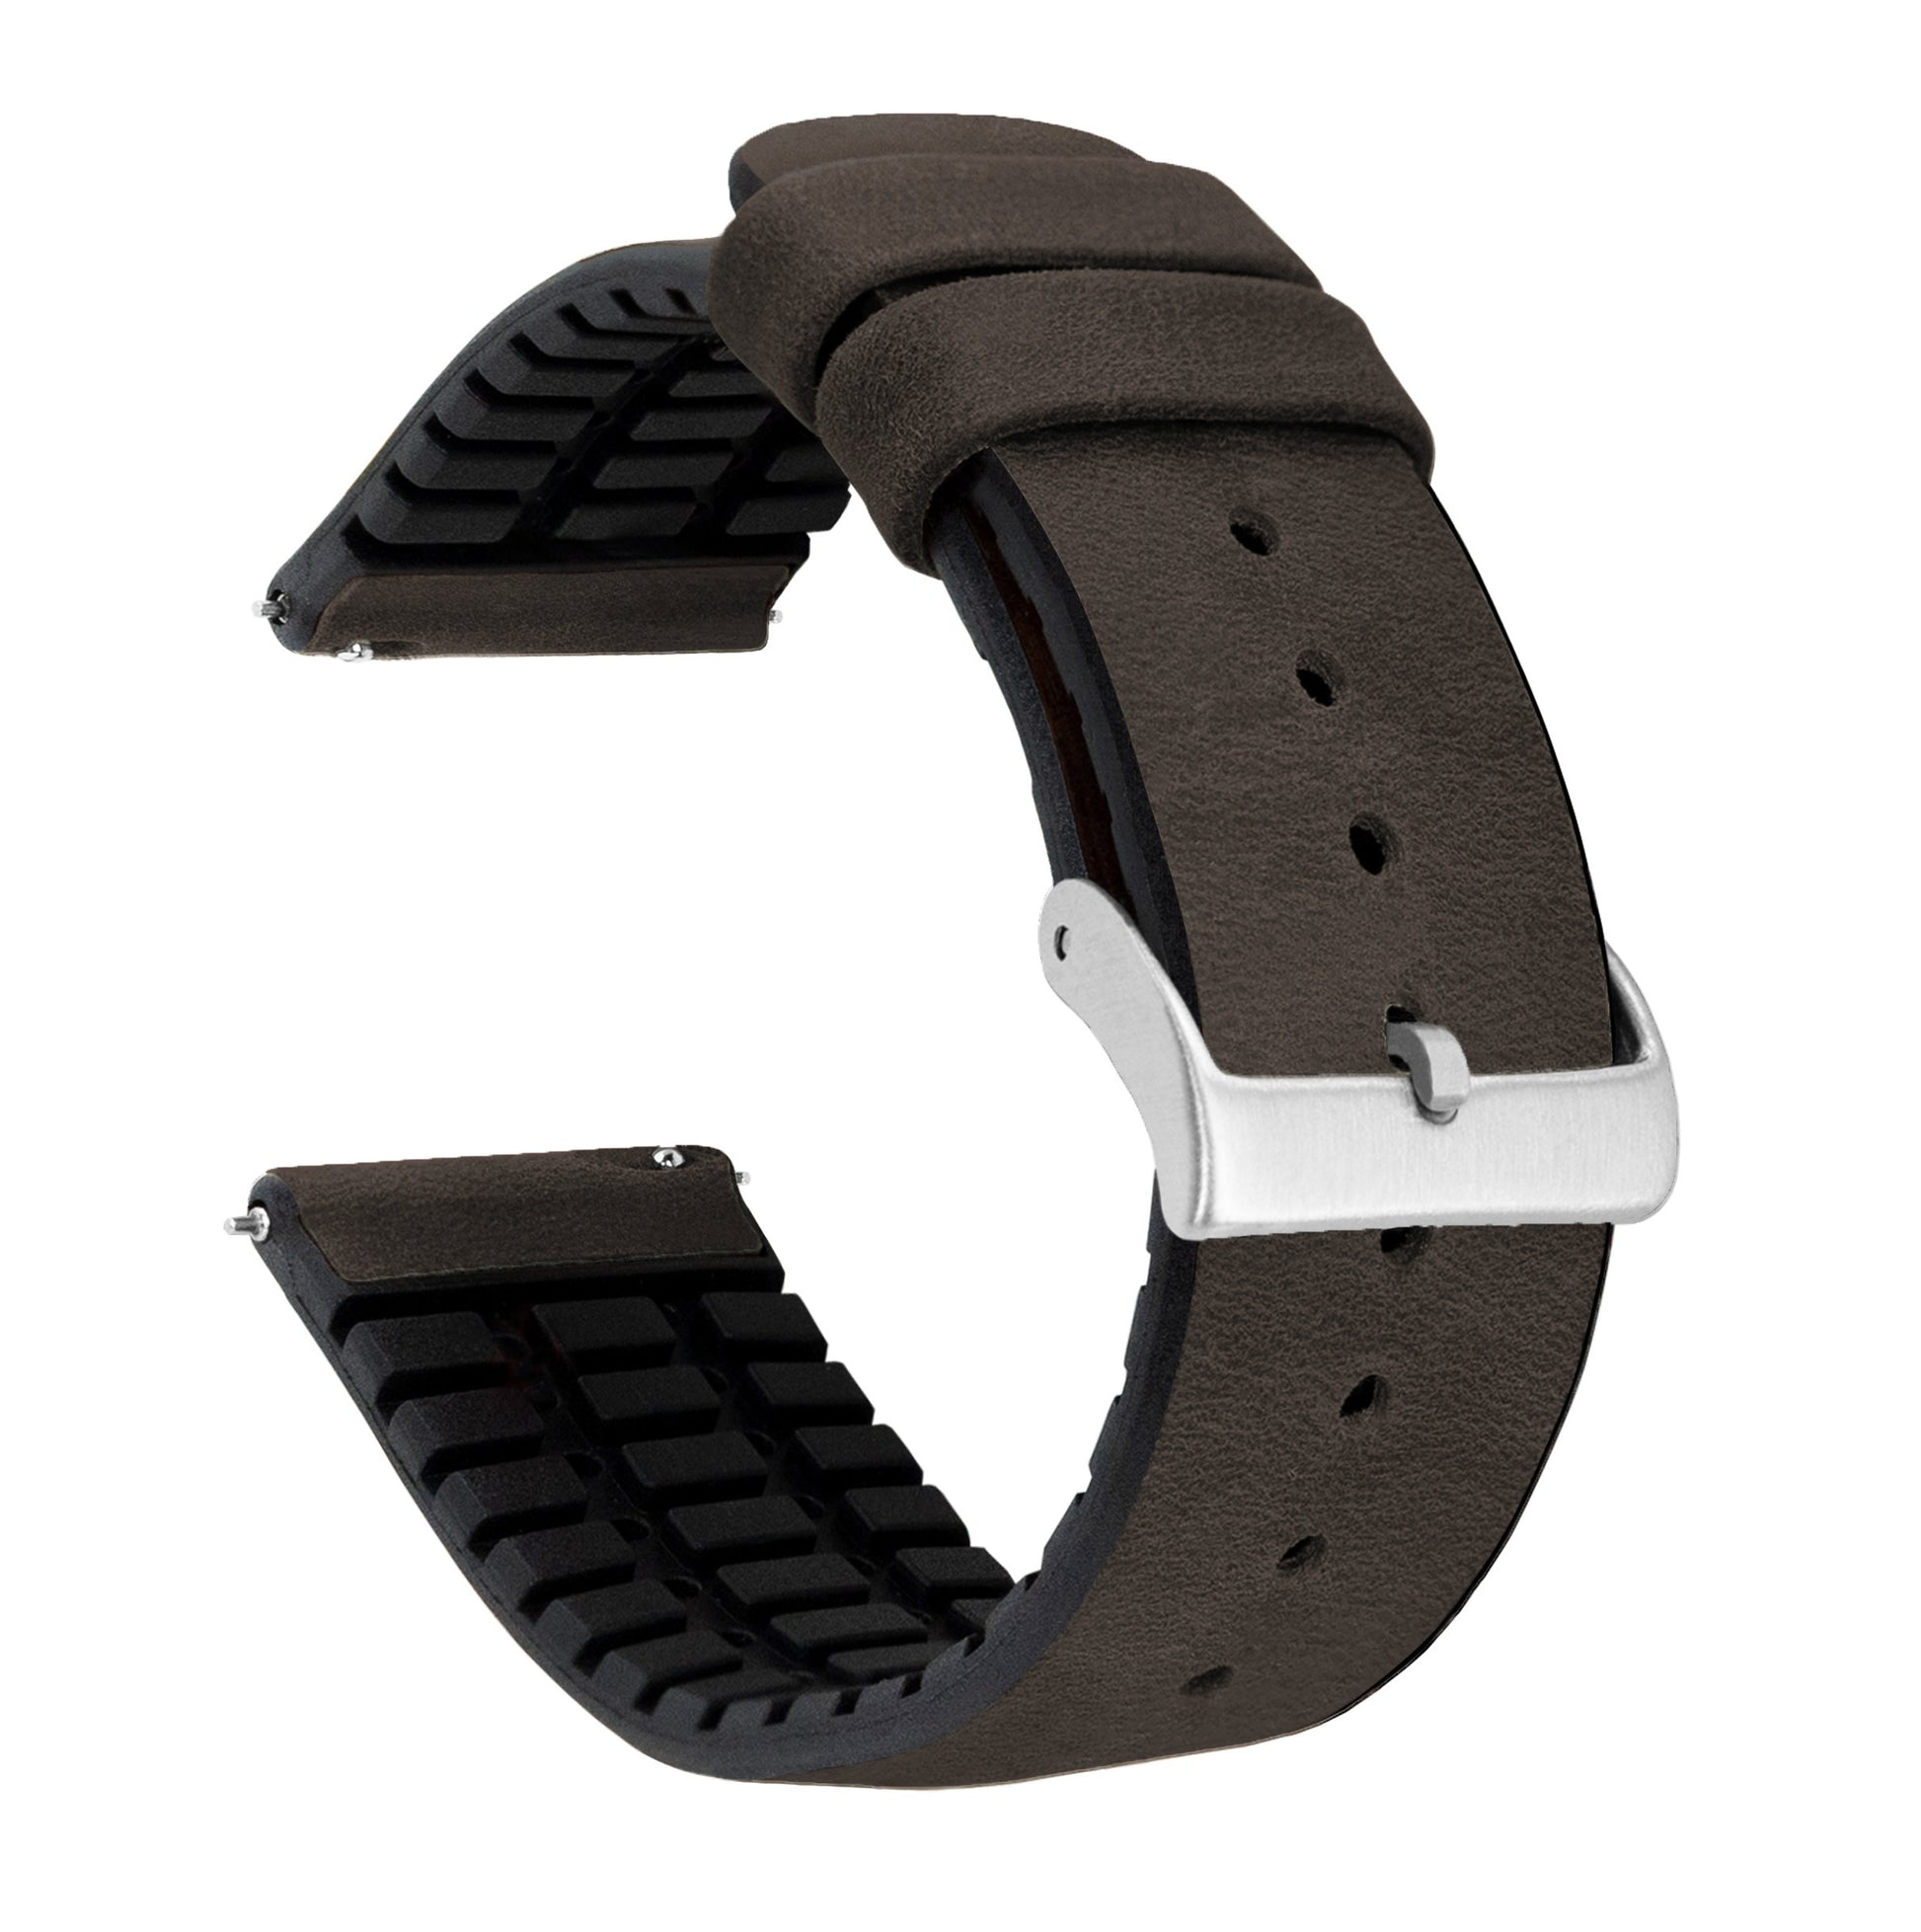 Moto 360 Gen2 | Leather and Rubber Hybrid | Smoke Brown - Barton Watch Bands